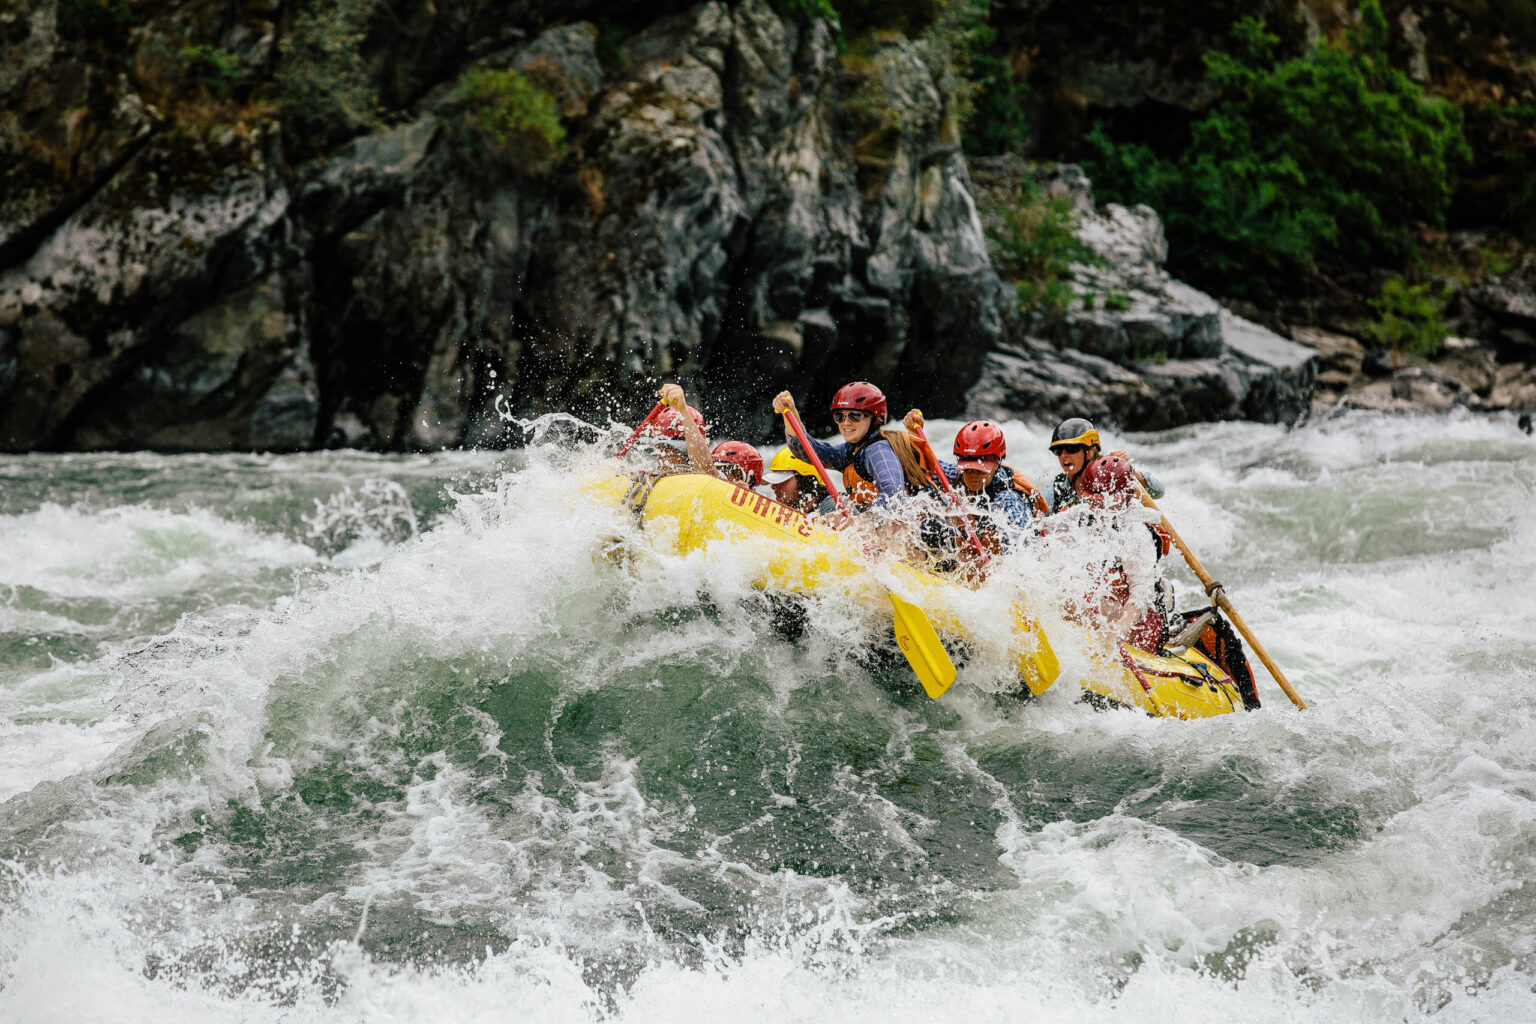 Group whitewater rafting.